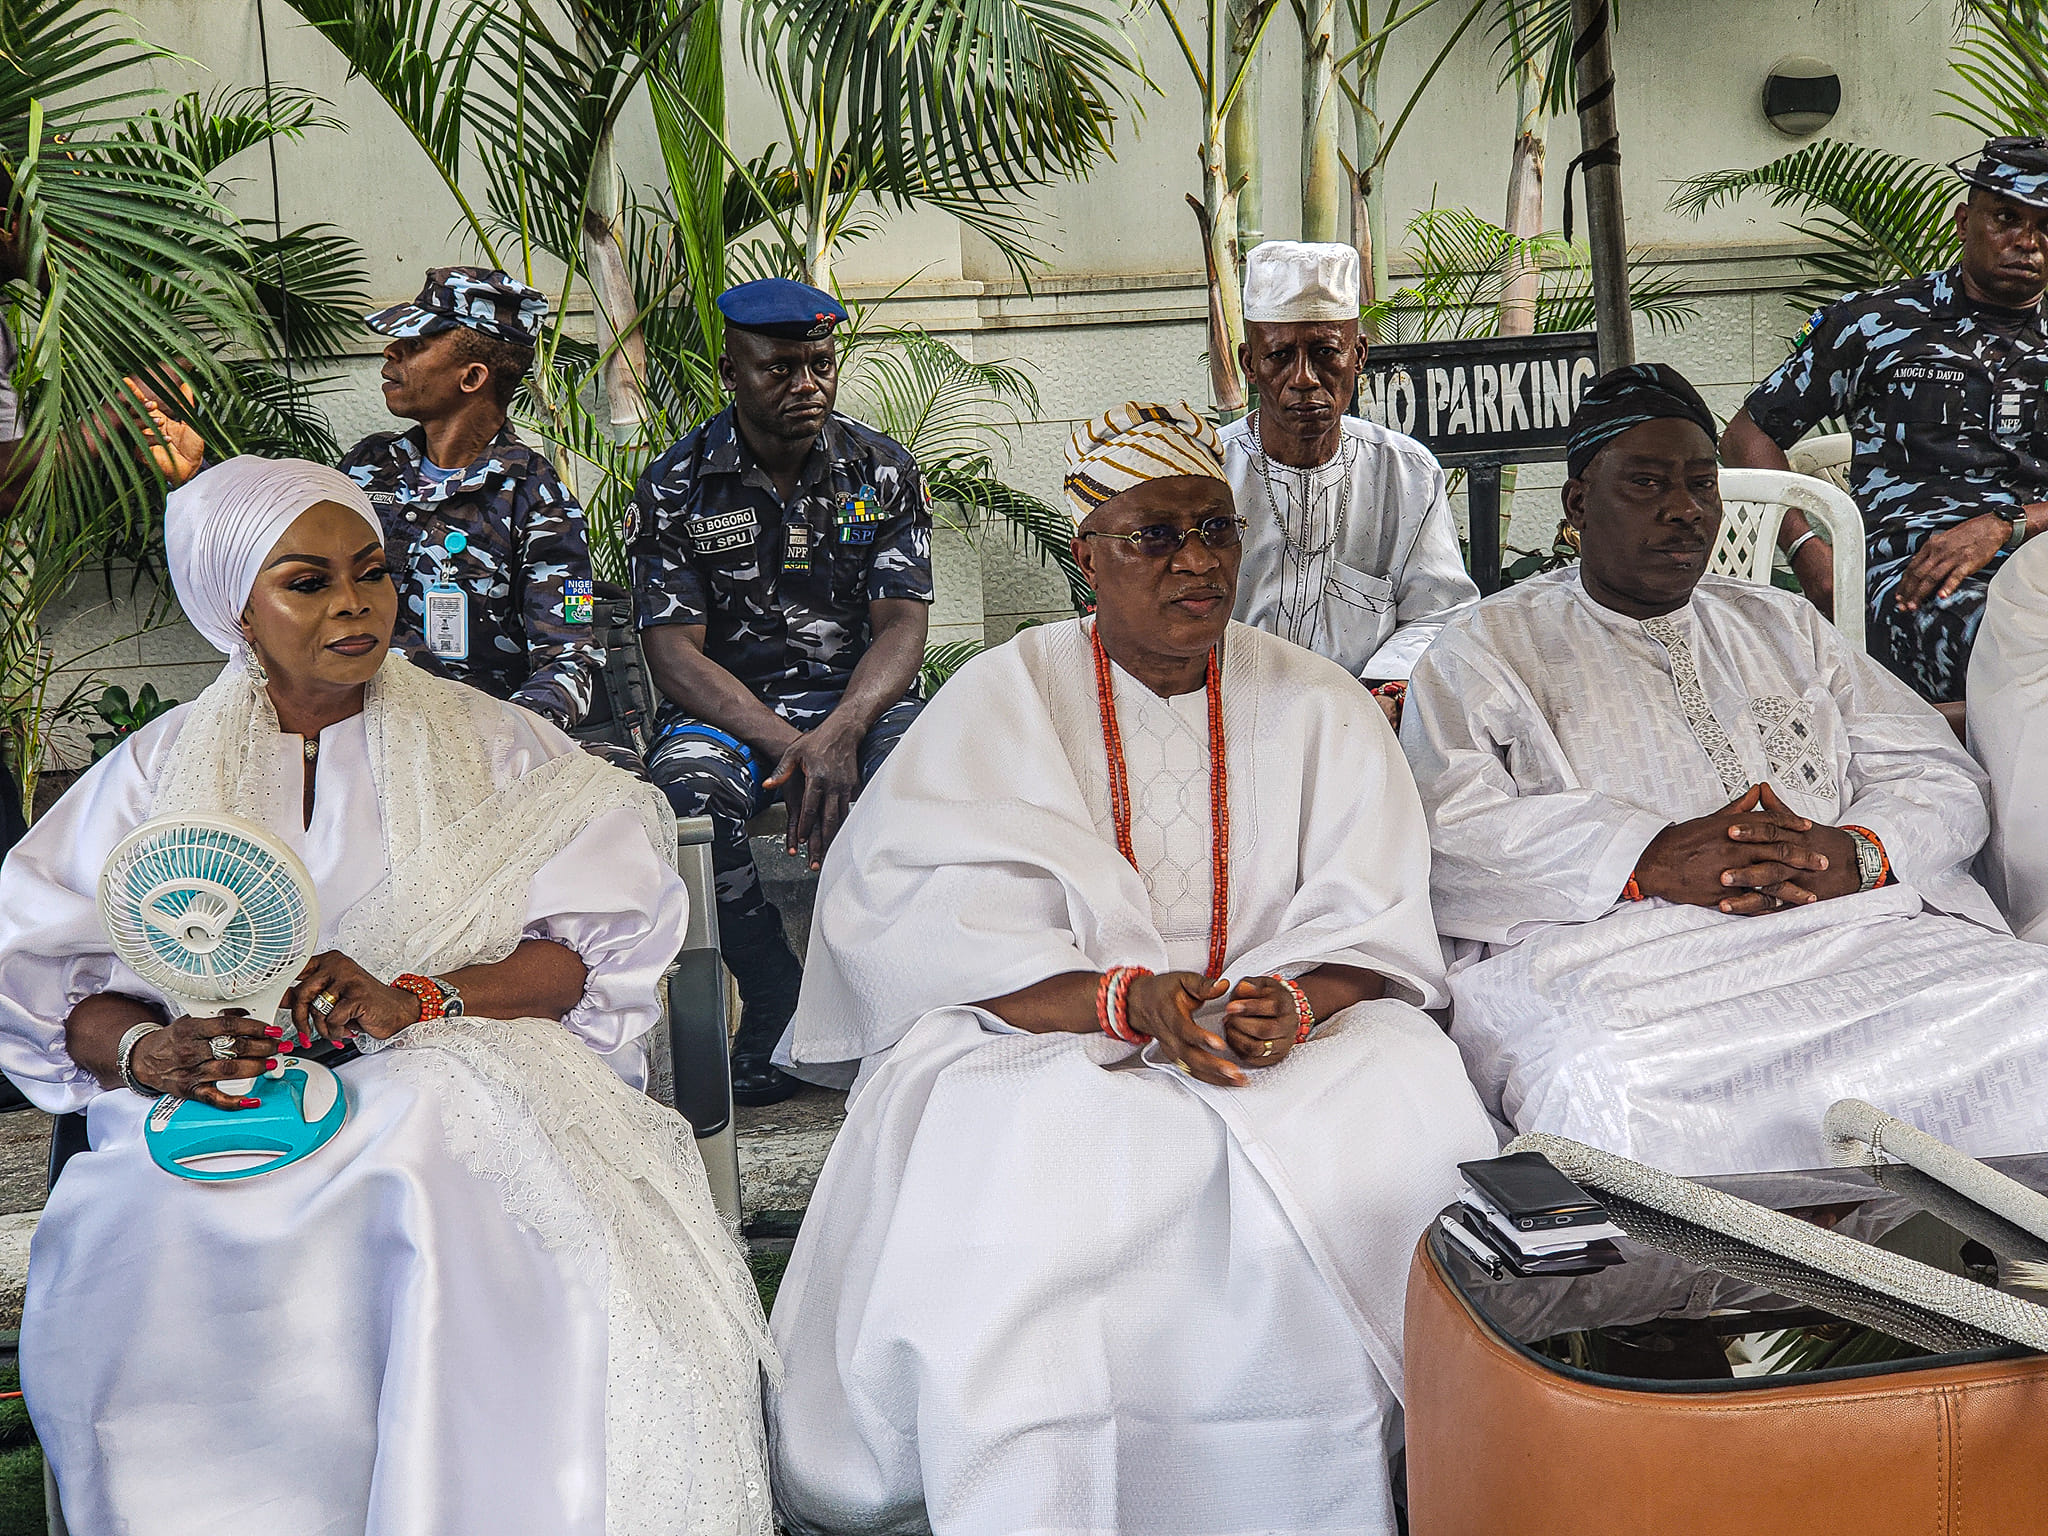 Onisabe of Igbobi-Sabe, Yaba, HRM Oba Owolabi Adesina A. A. Adeniyi, Sheikh AbdulHakeem Muh'd Awwal, the National Amir of the Ikhwan-ul Muslimiin Foundation, addressed the pressing issue of Nigeria's challenges and the path towards progress.